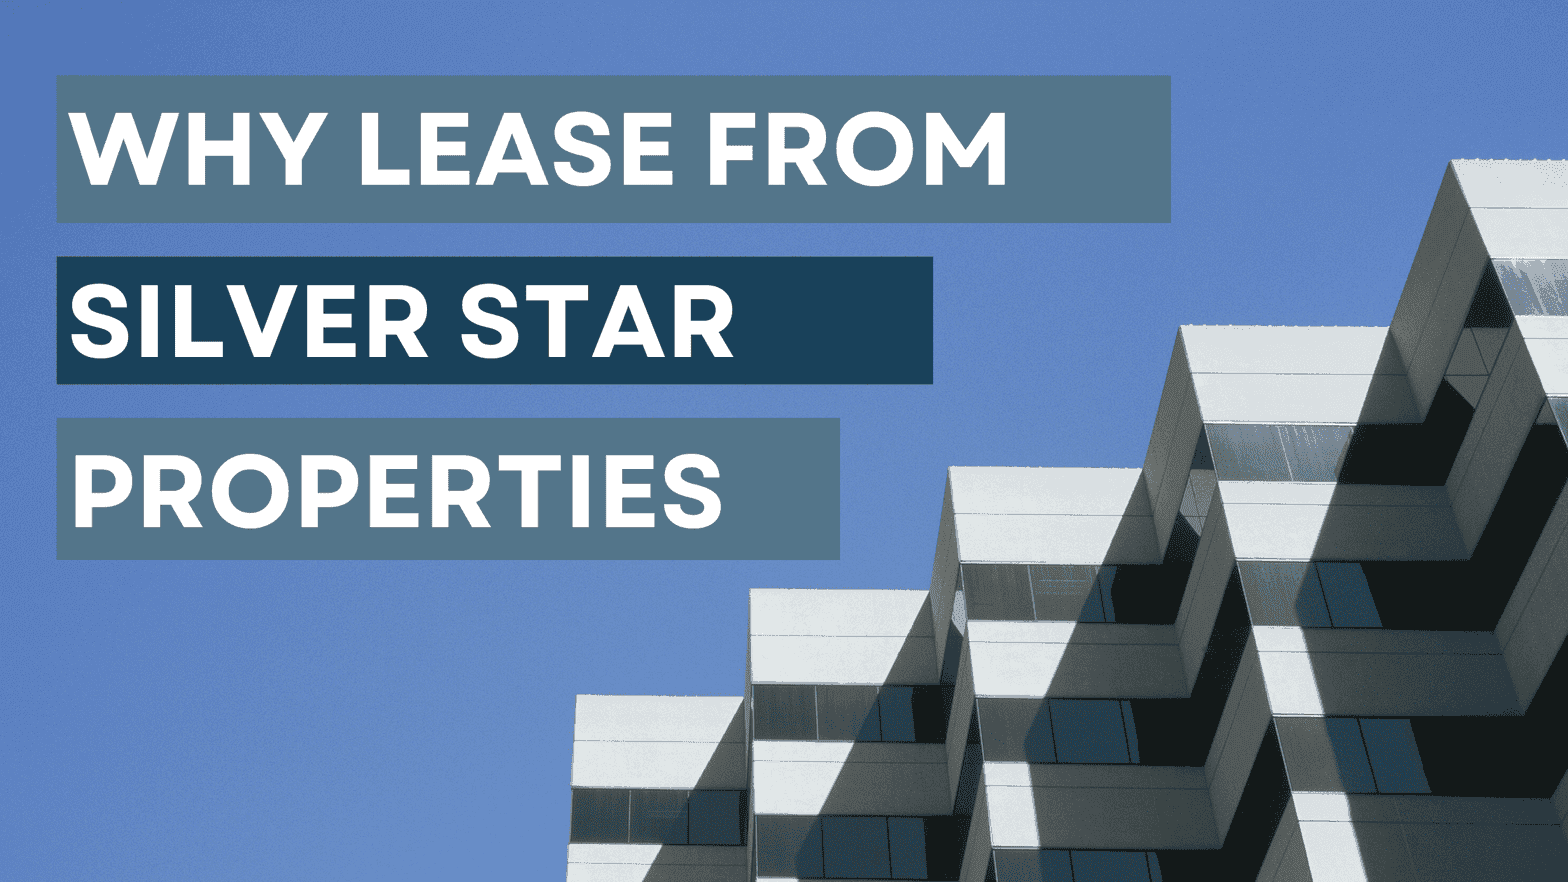 Why lease commercial real estate from Silver Star Properties?